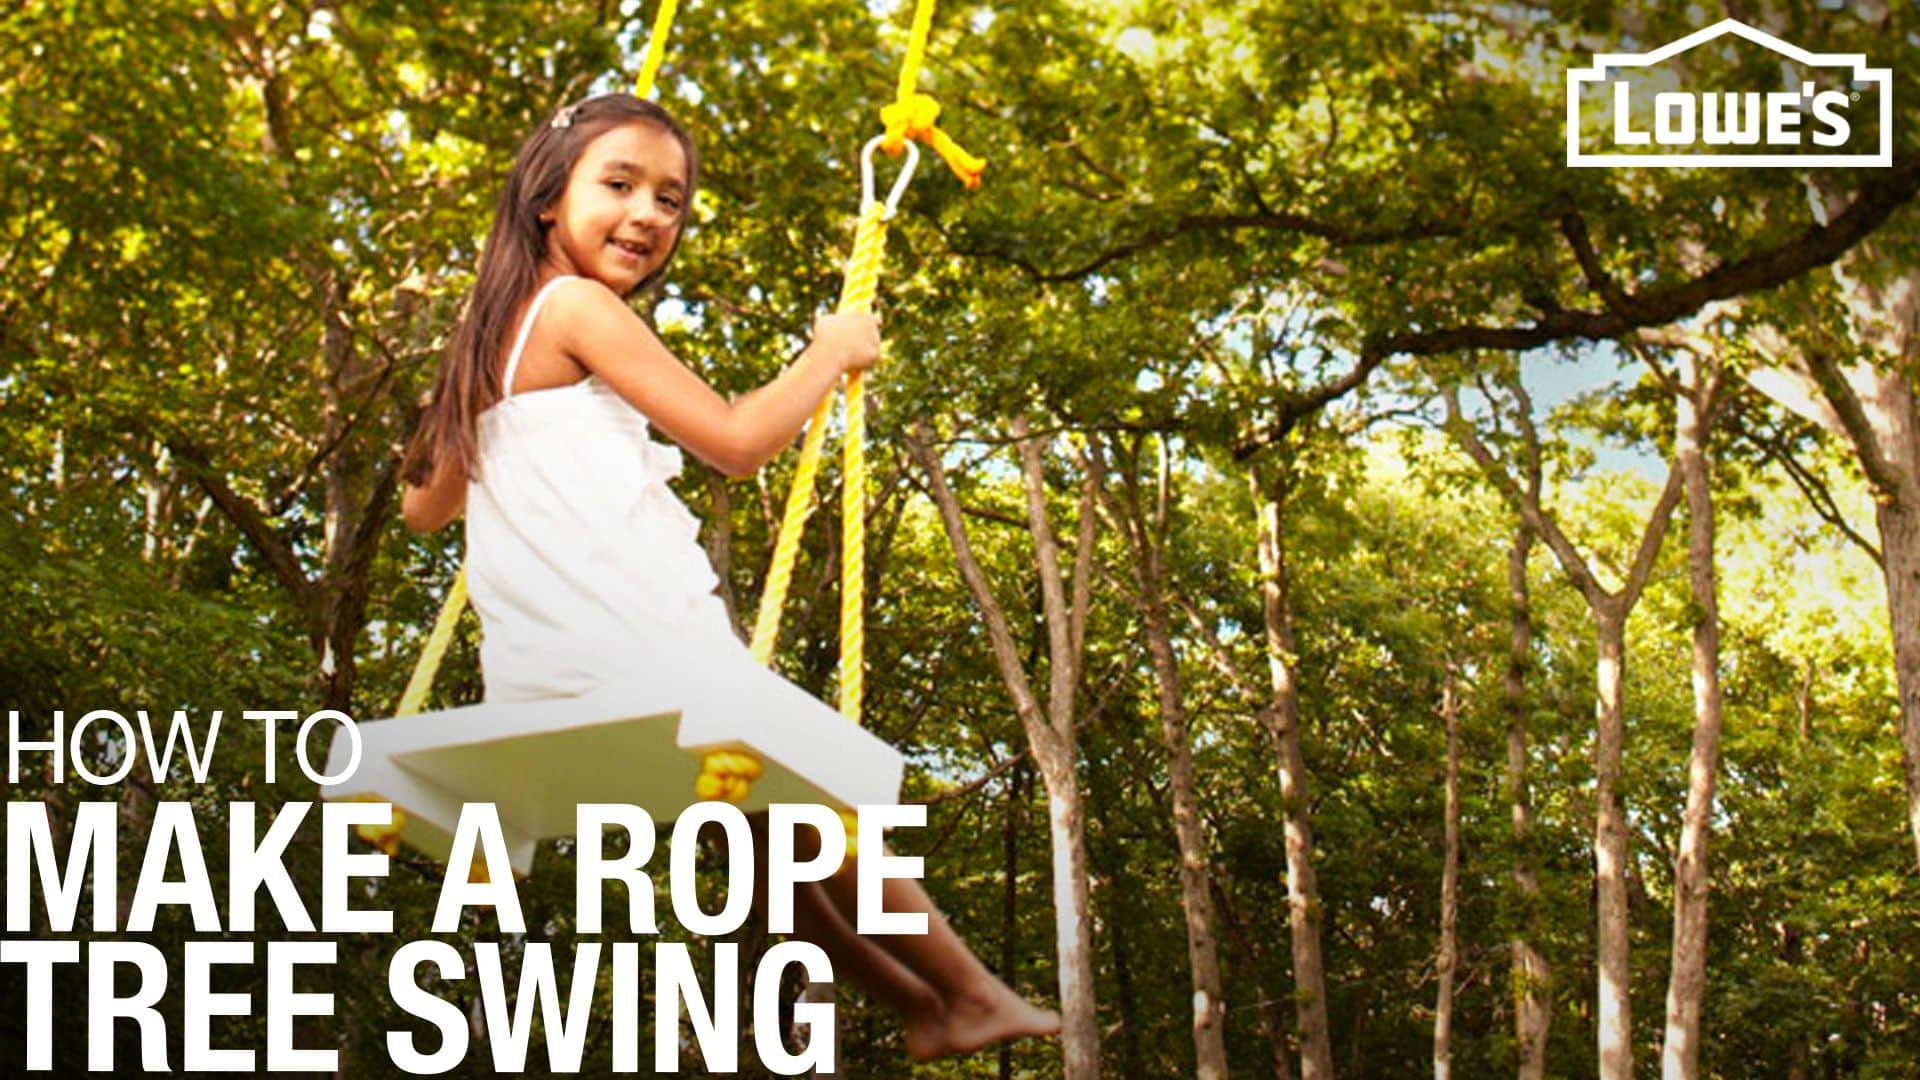 How to Make a Rope Tree Swing